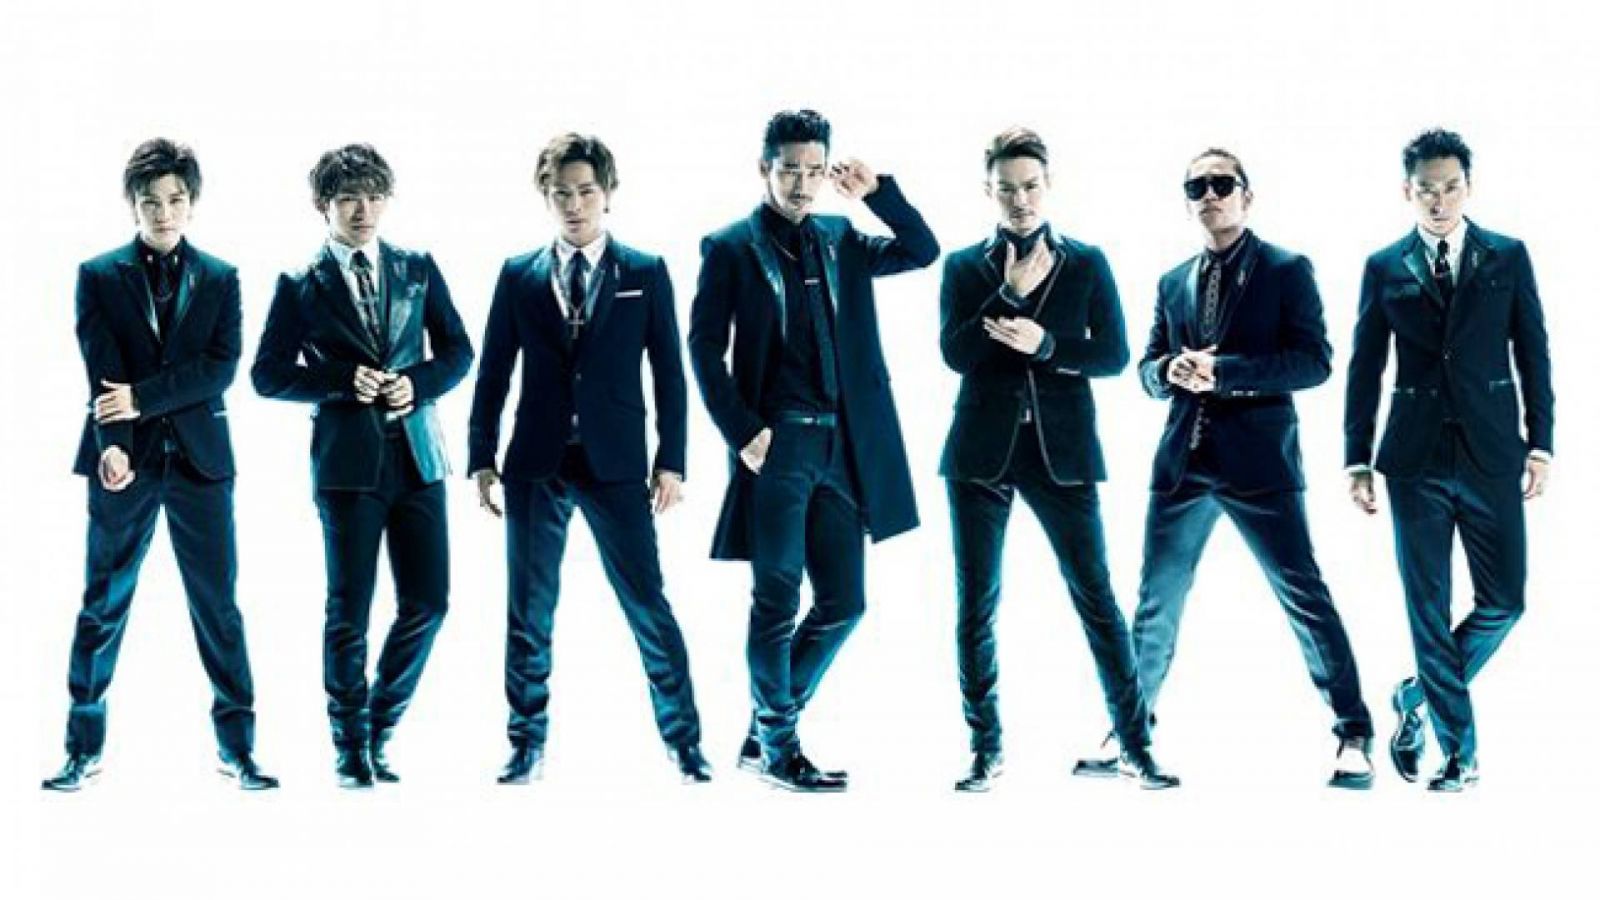 Sandaime J Soul Brothers from EXILE TRIBE to Release a New Single © 2015 LDH inc., provided by PR TIMES Inc.